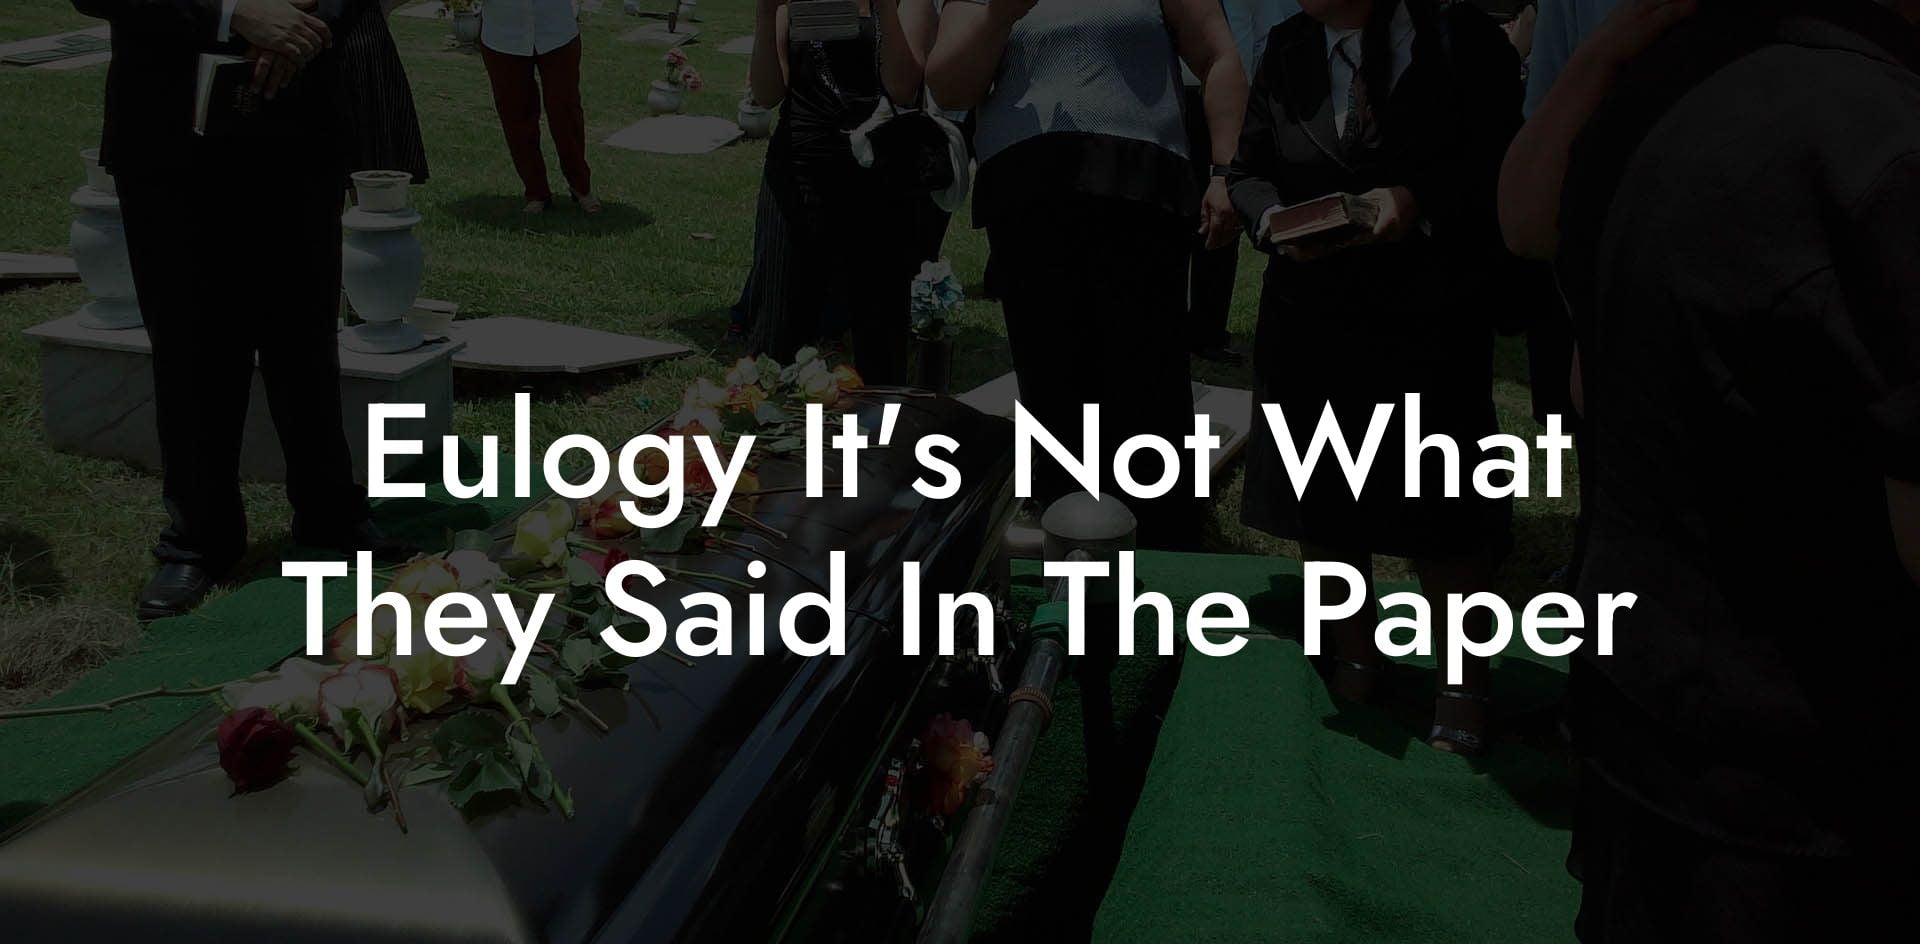 Eulogy It's Not What They Said In The Paper